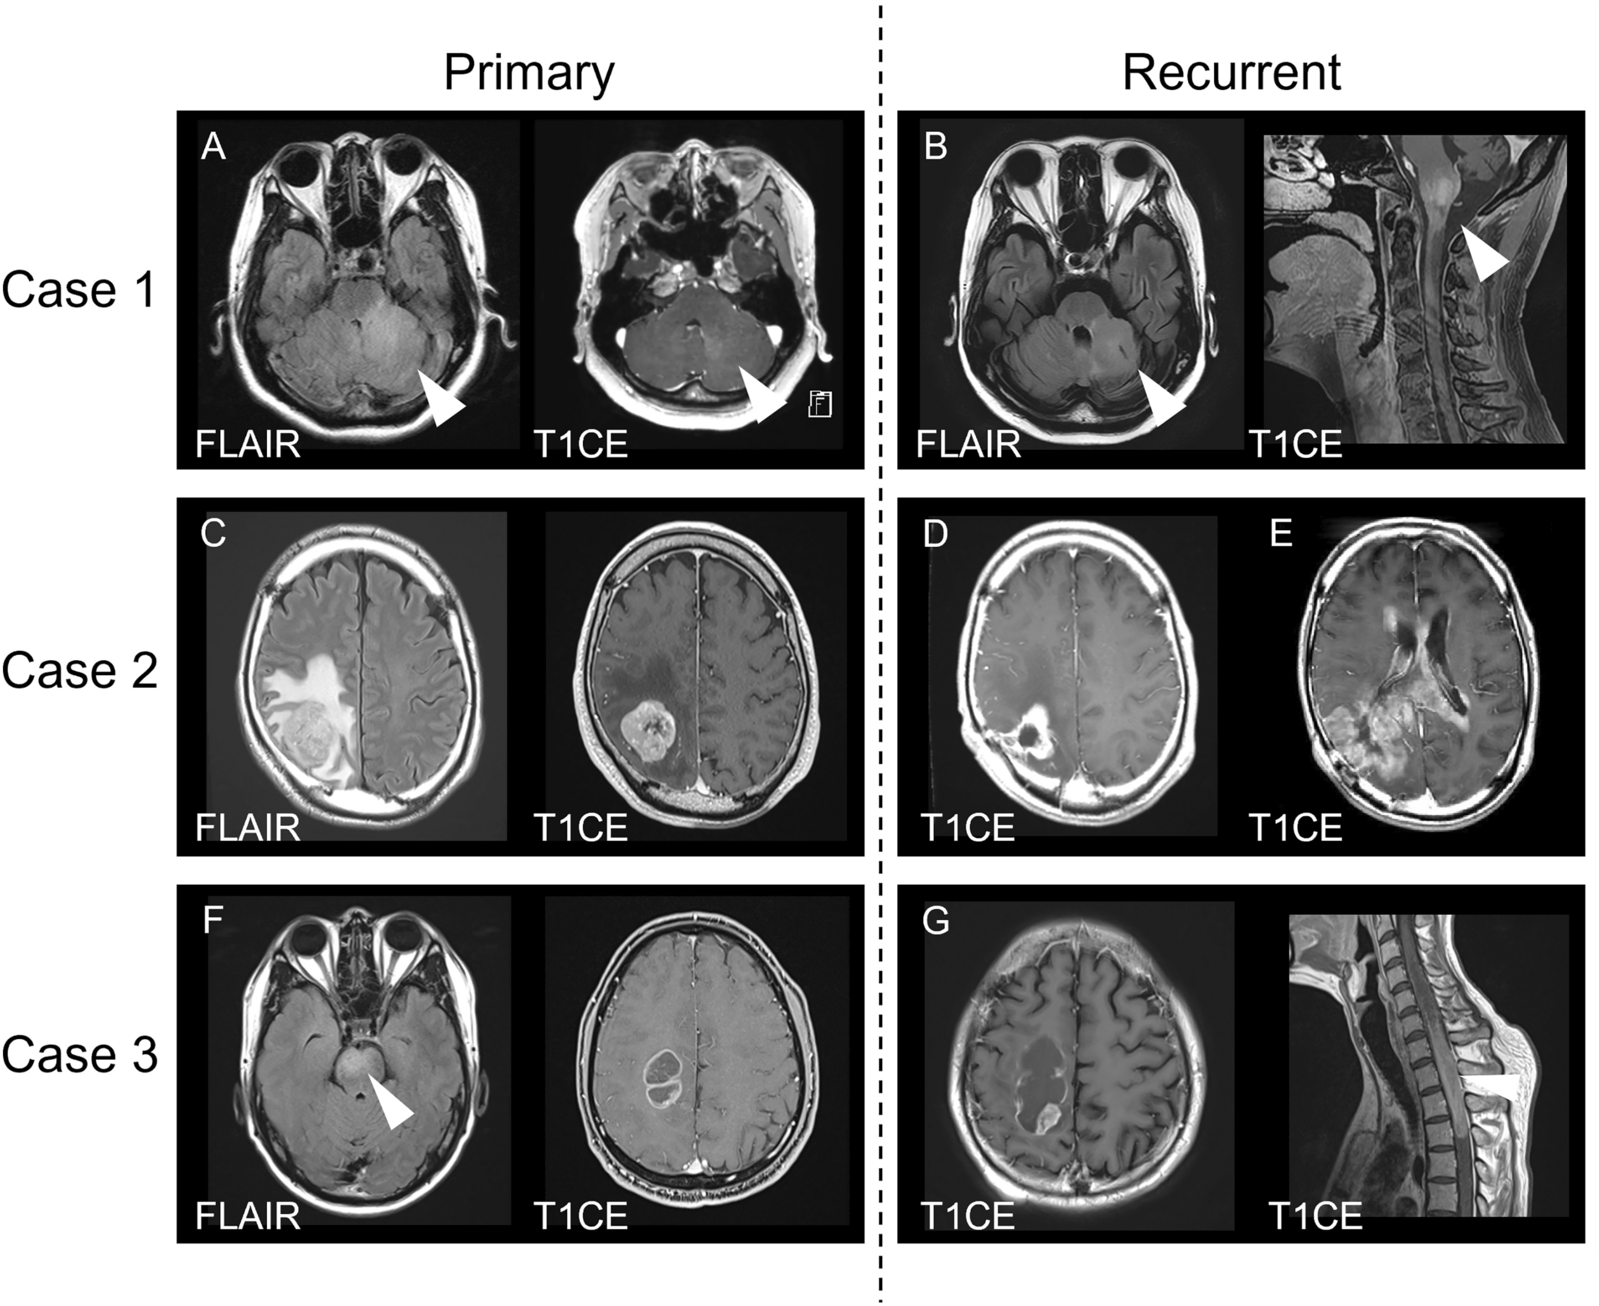 Pediatric-type high-grade gliomas with PDGFRA amplification in adult patients with Li-Fraumeni syndrome: clinical and molecular characterization of three cases